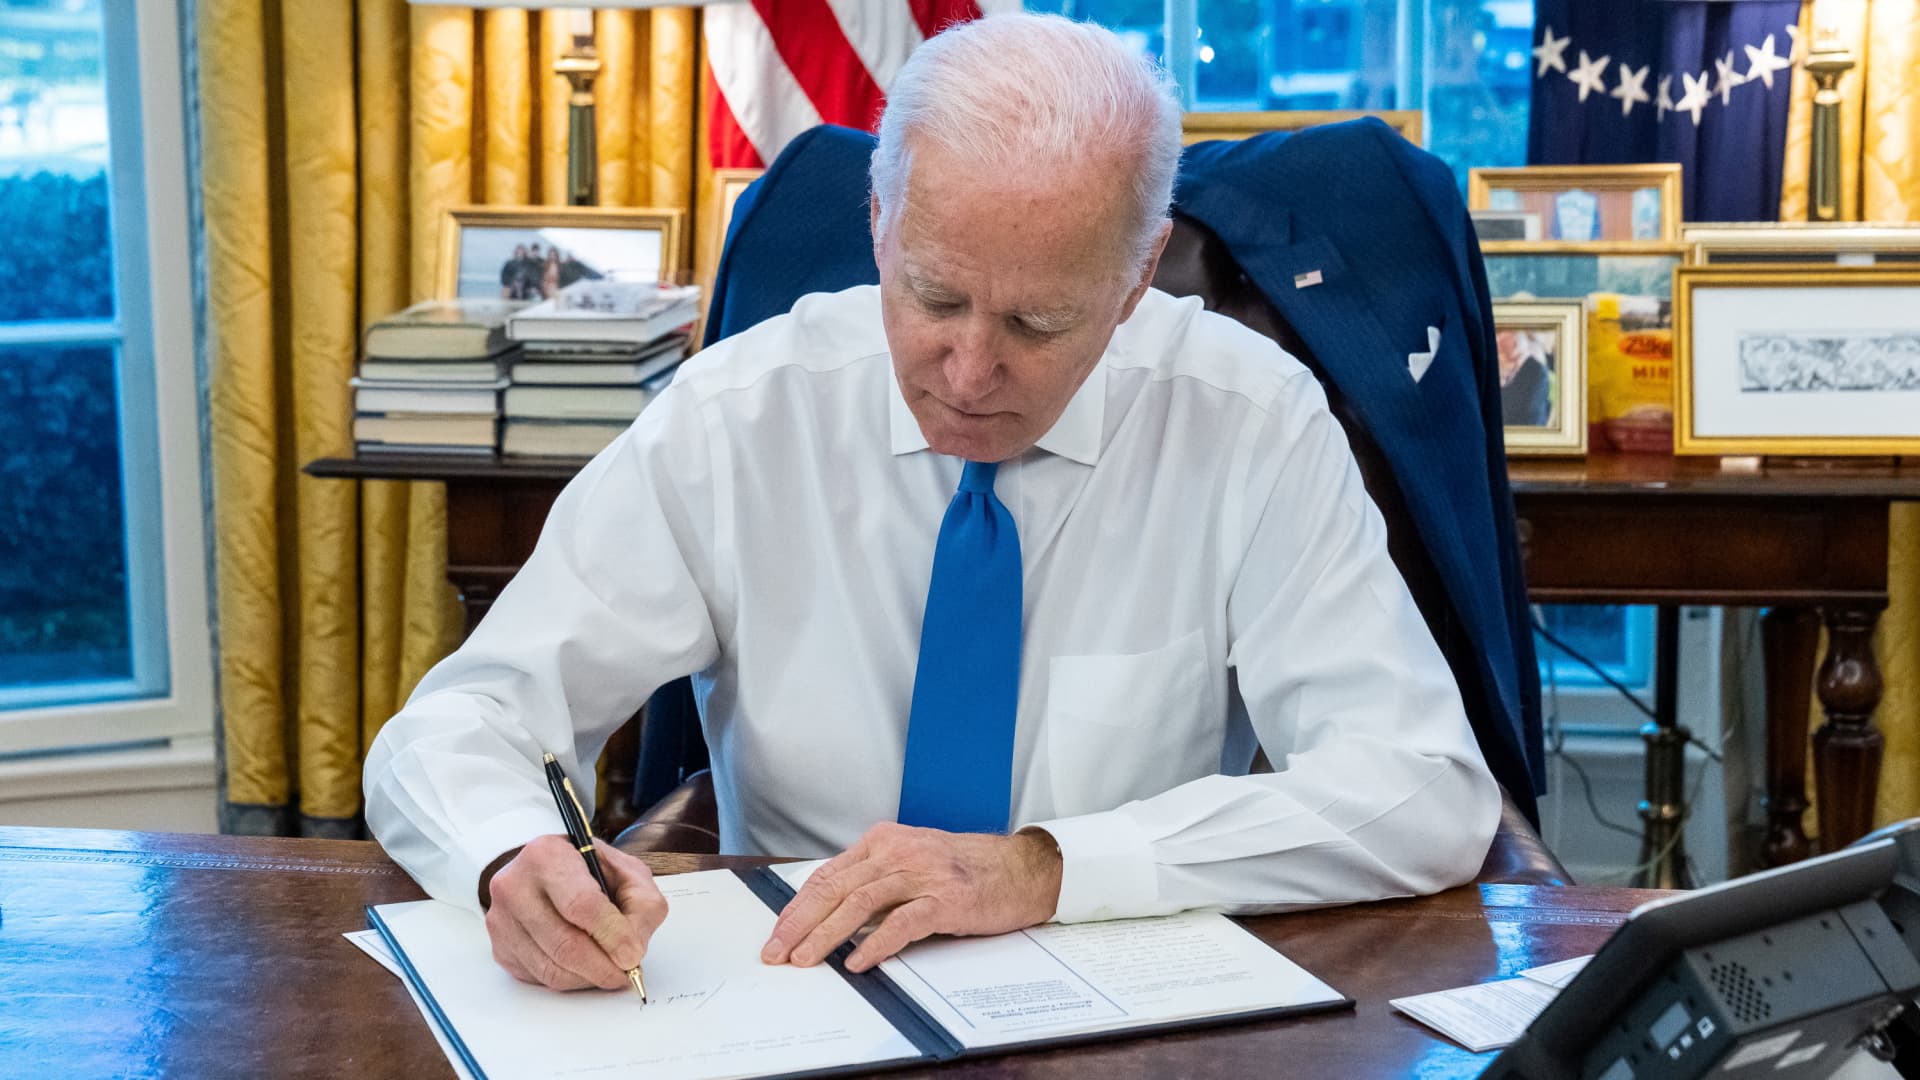 U.S. President Joe Biden signs an executive order to prohibit trade and investment between U.S. individuals and the two breakaway regions of eastern Ukraine recognized as independent by Russia, at the White House in Washington, U.S., February 21, 2022.